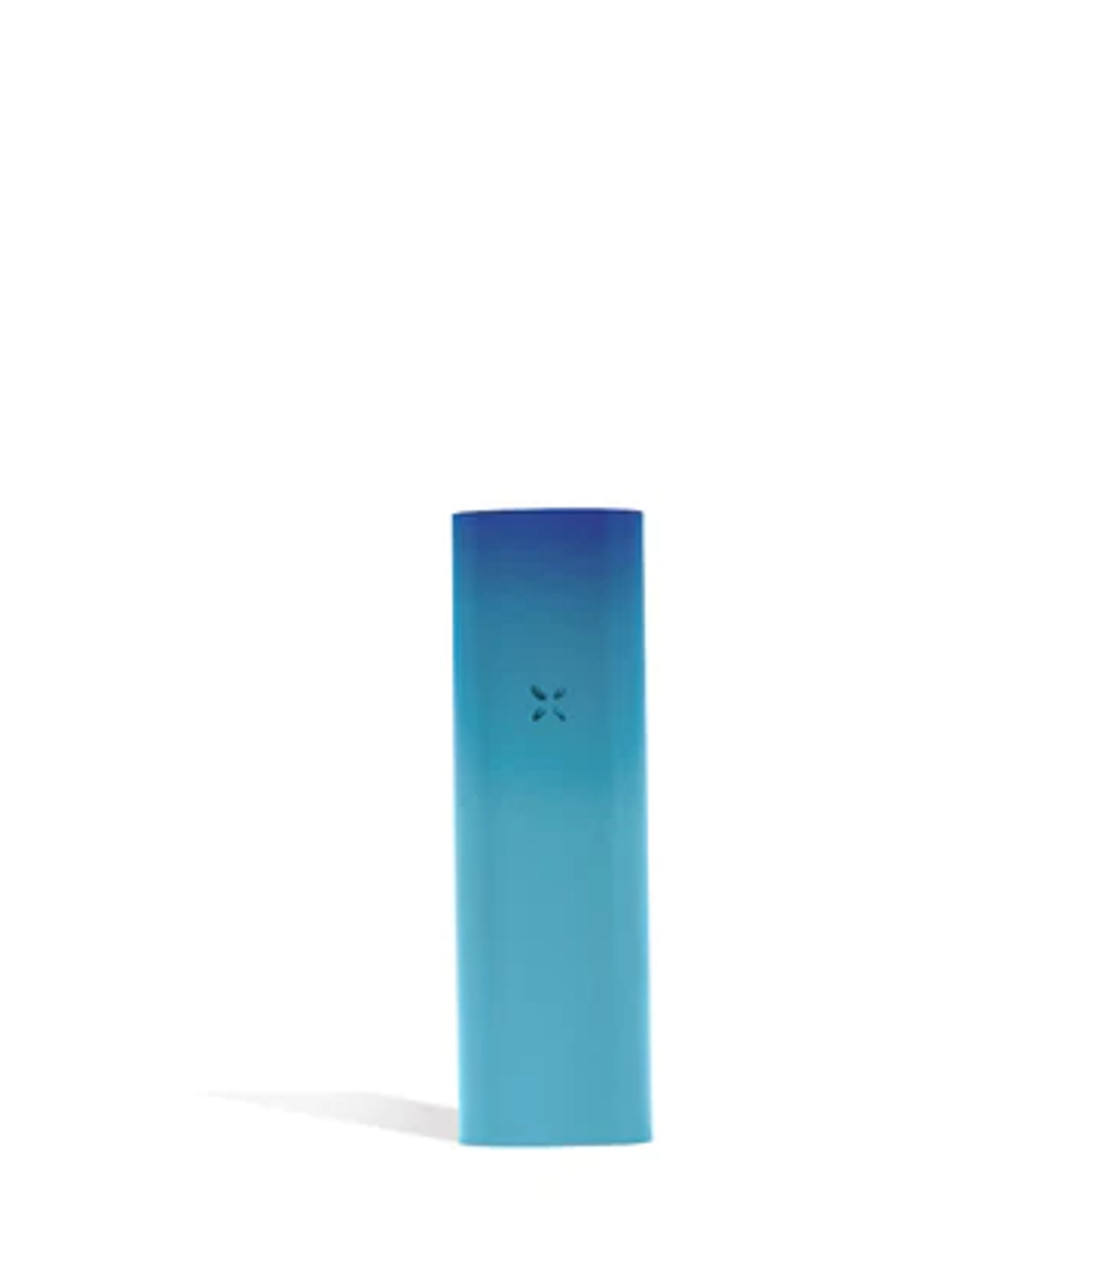 Pax 3 Kit Complet – High Vaping